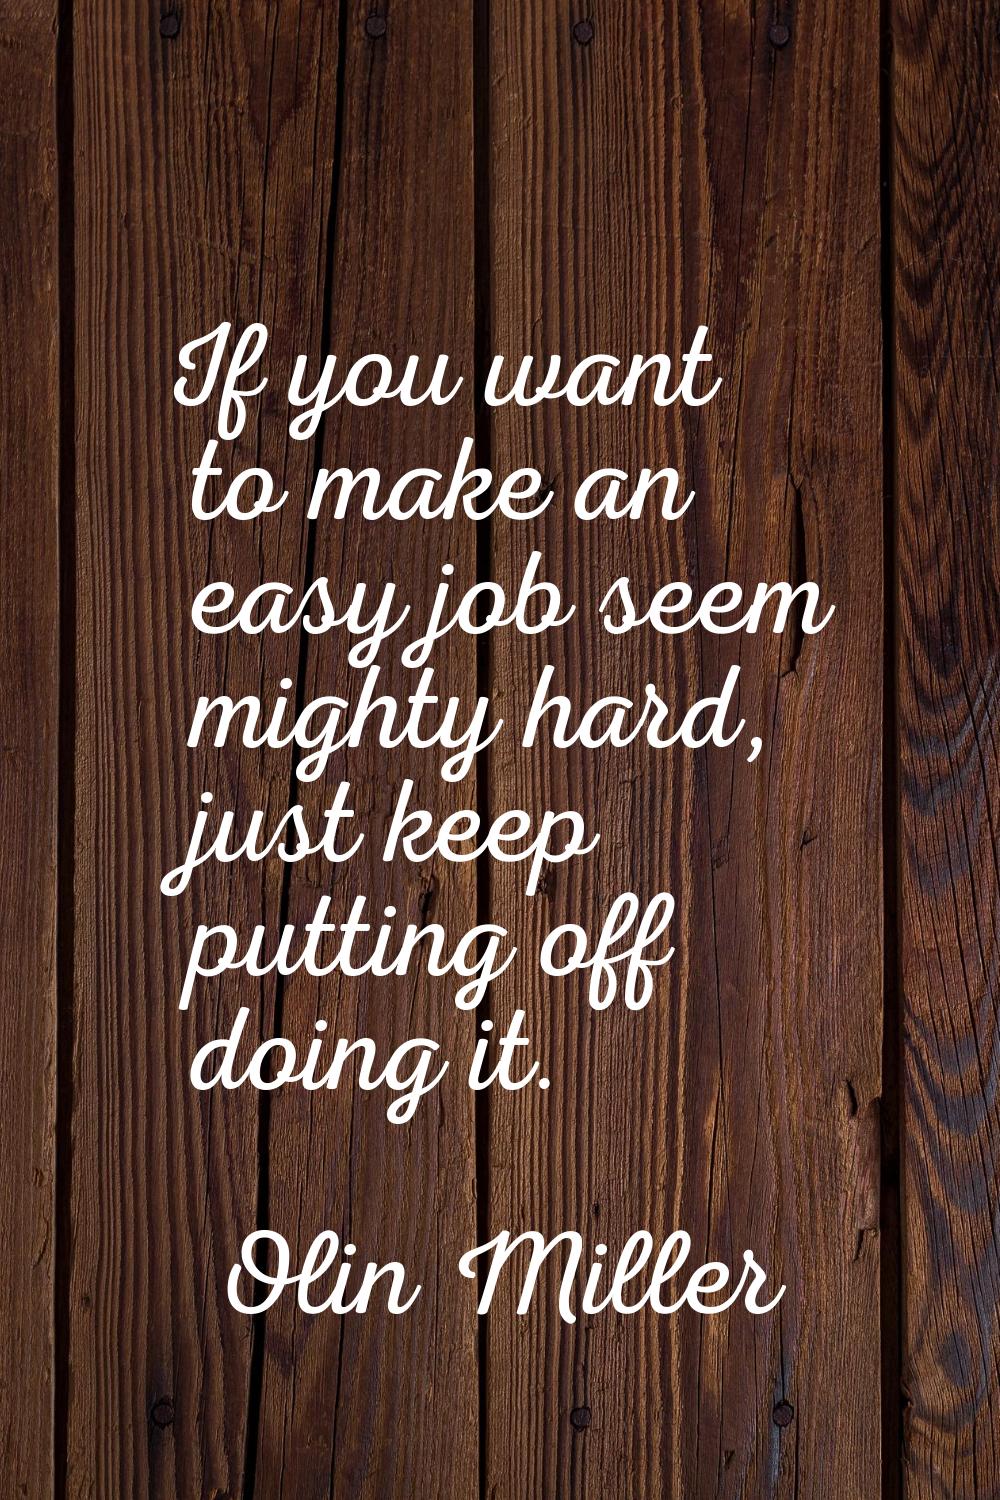 If you want to make an easy job seem mighty hard, just keep putting off doing it.